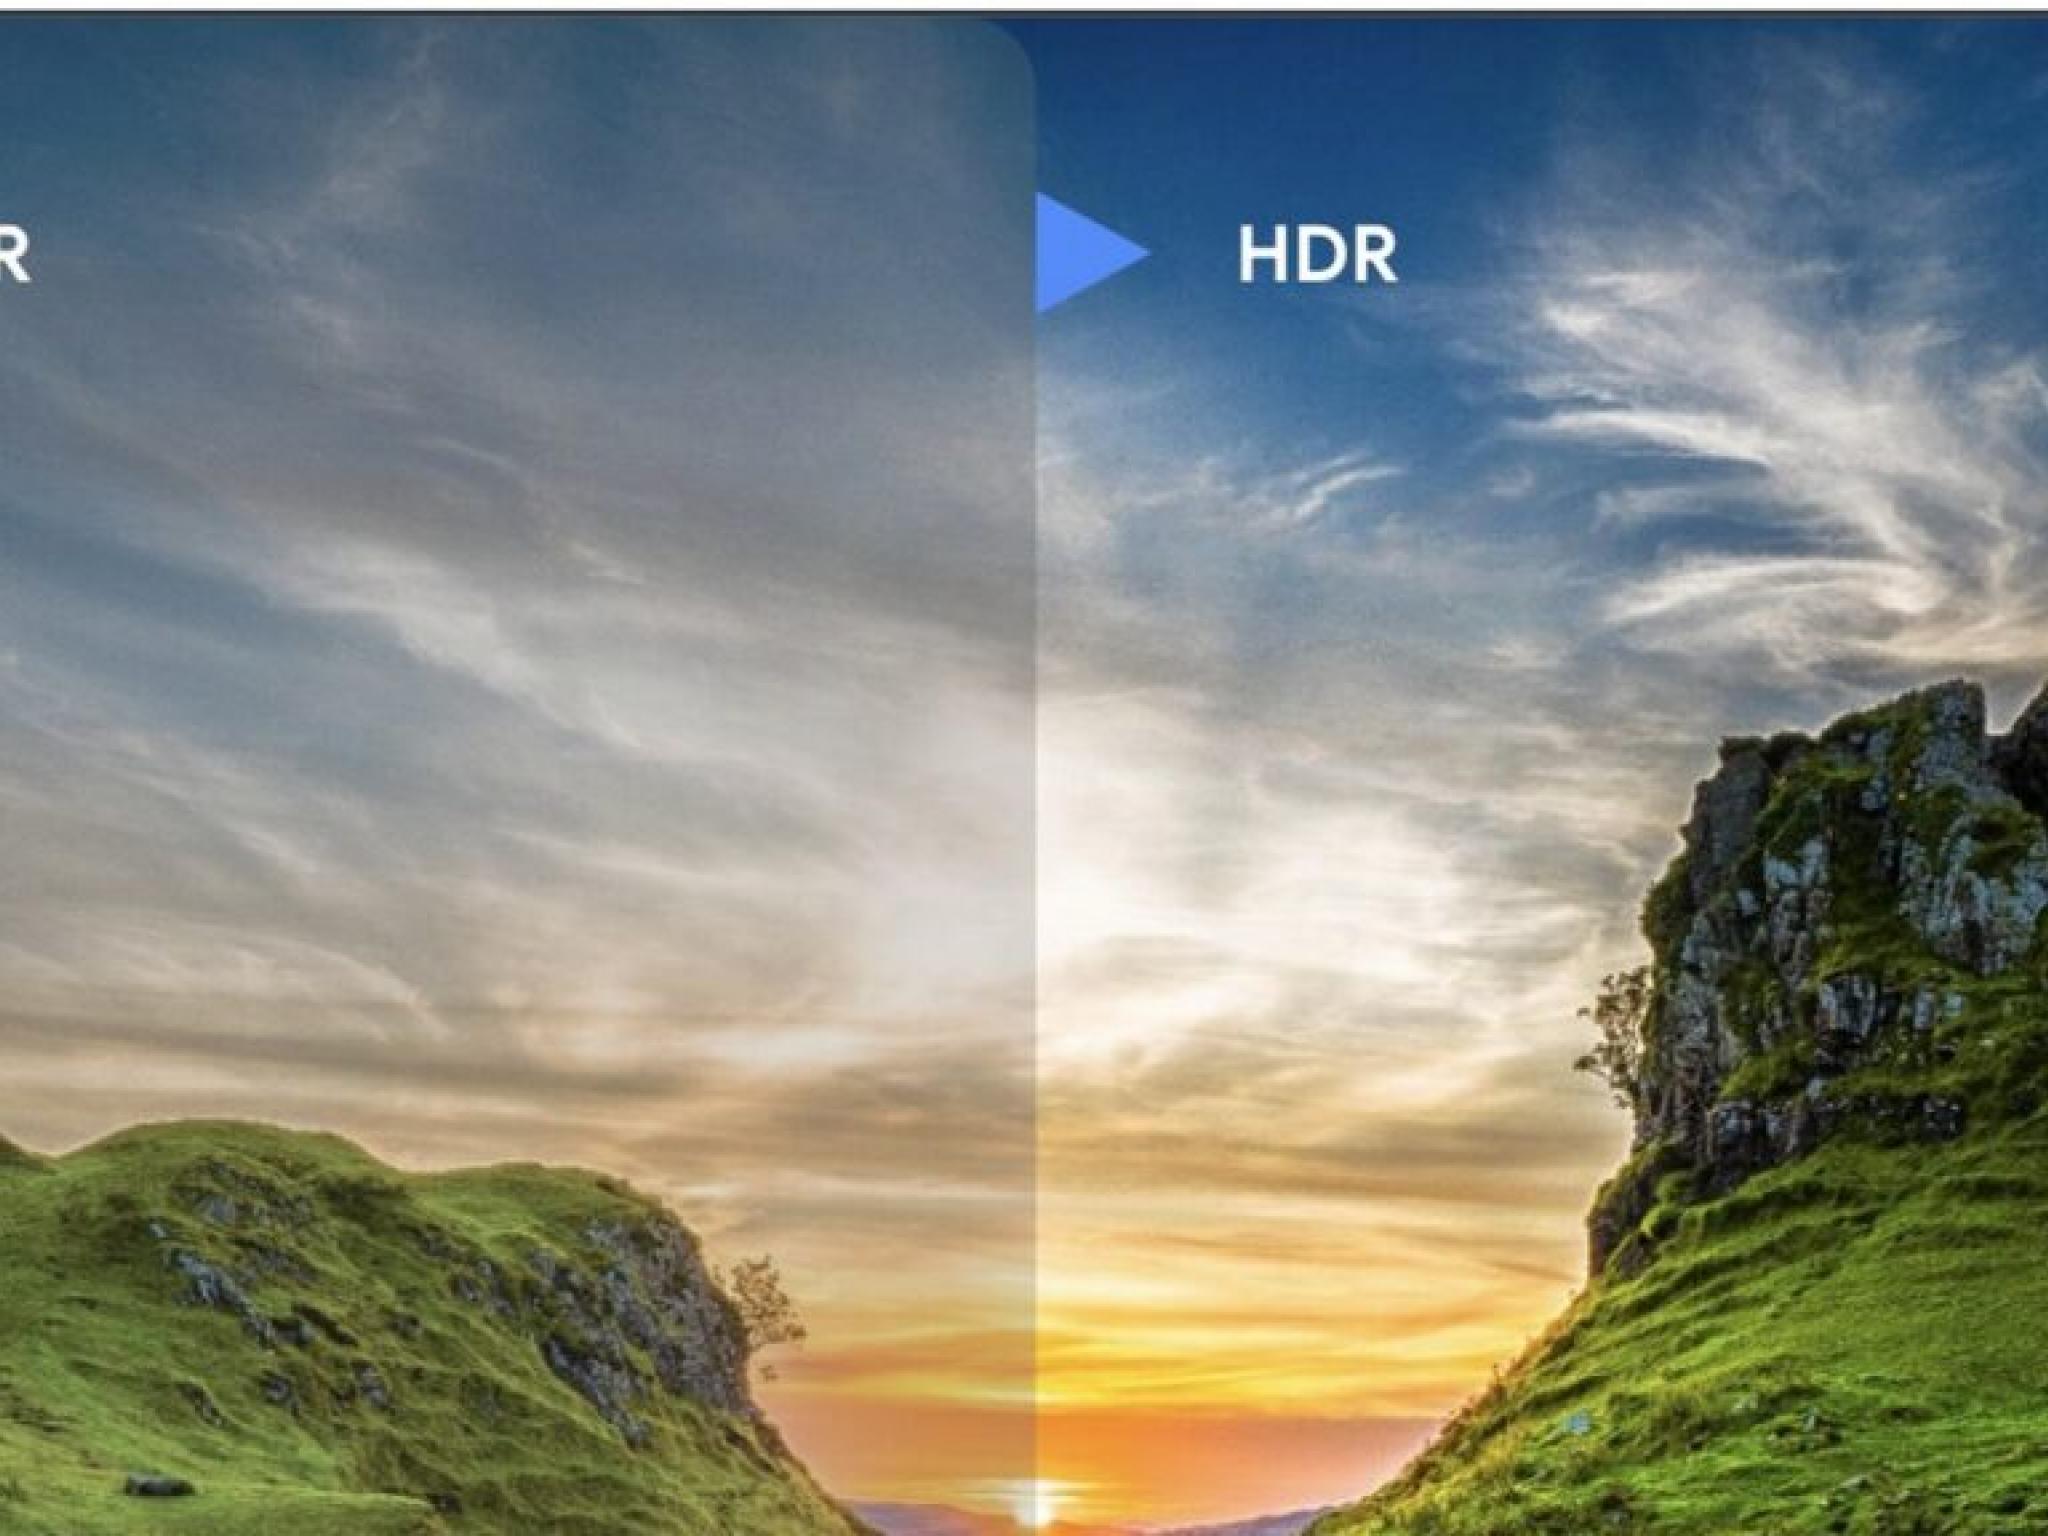  googles-camera-updates-will-soon-let-apps-like-instagram-capture-ultra-hdr-images-heres-why-its-important 